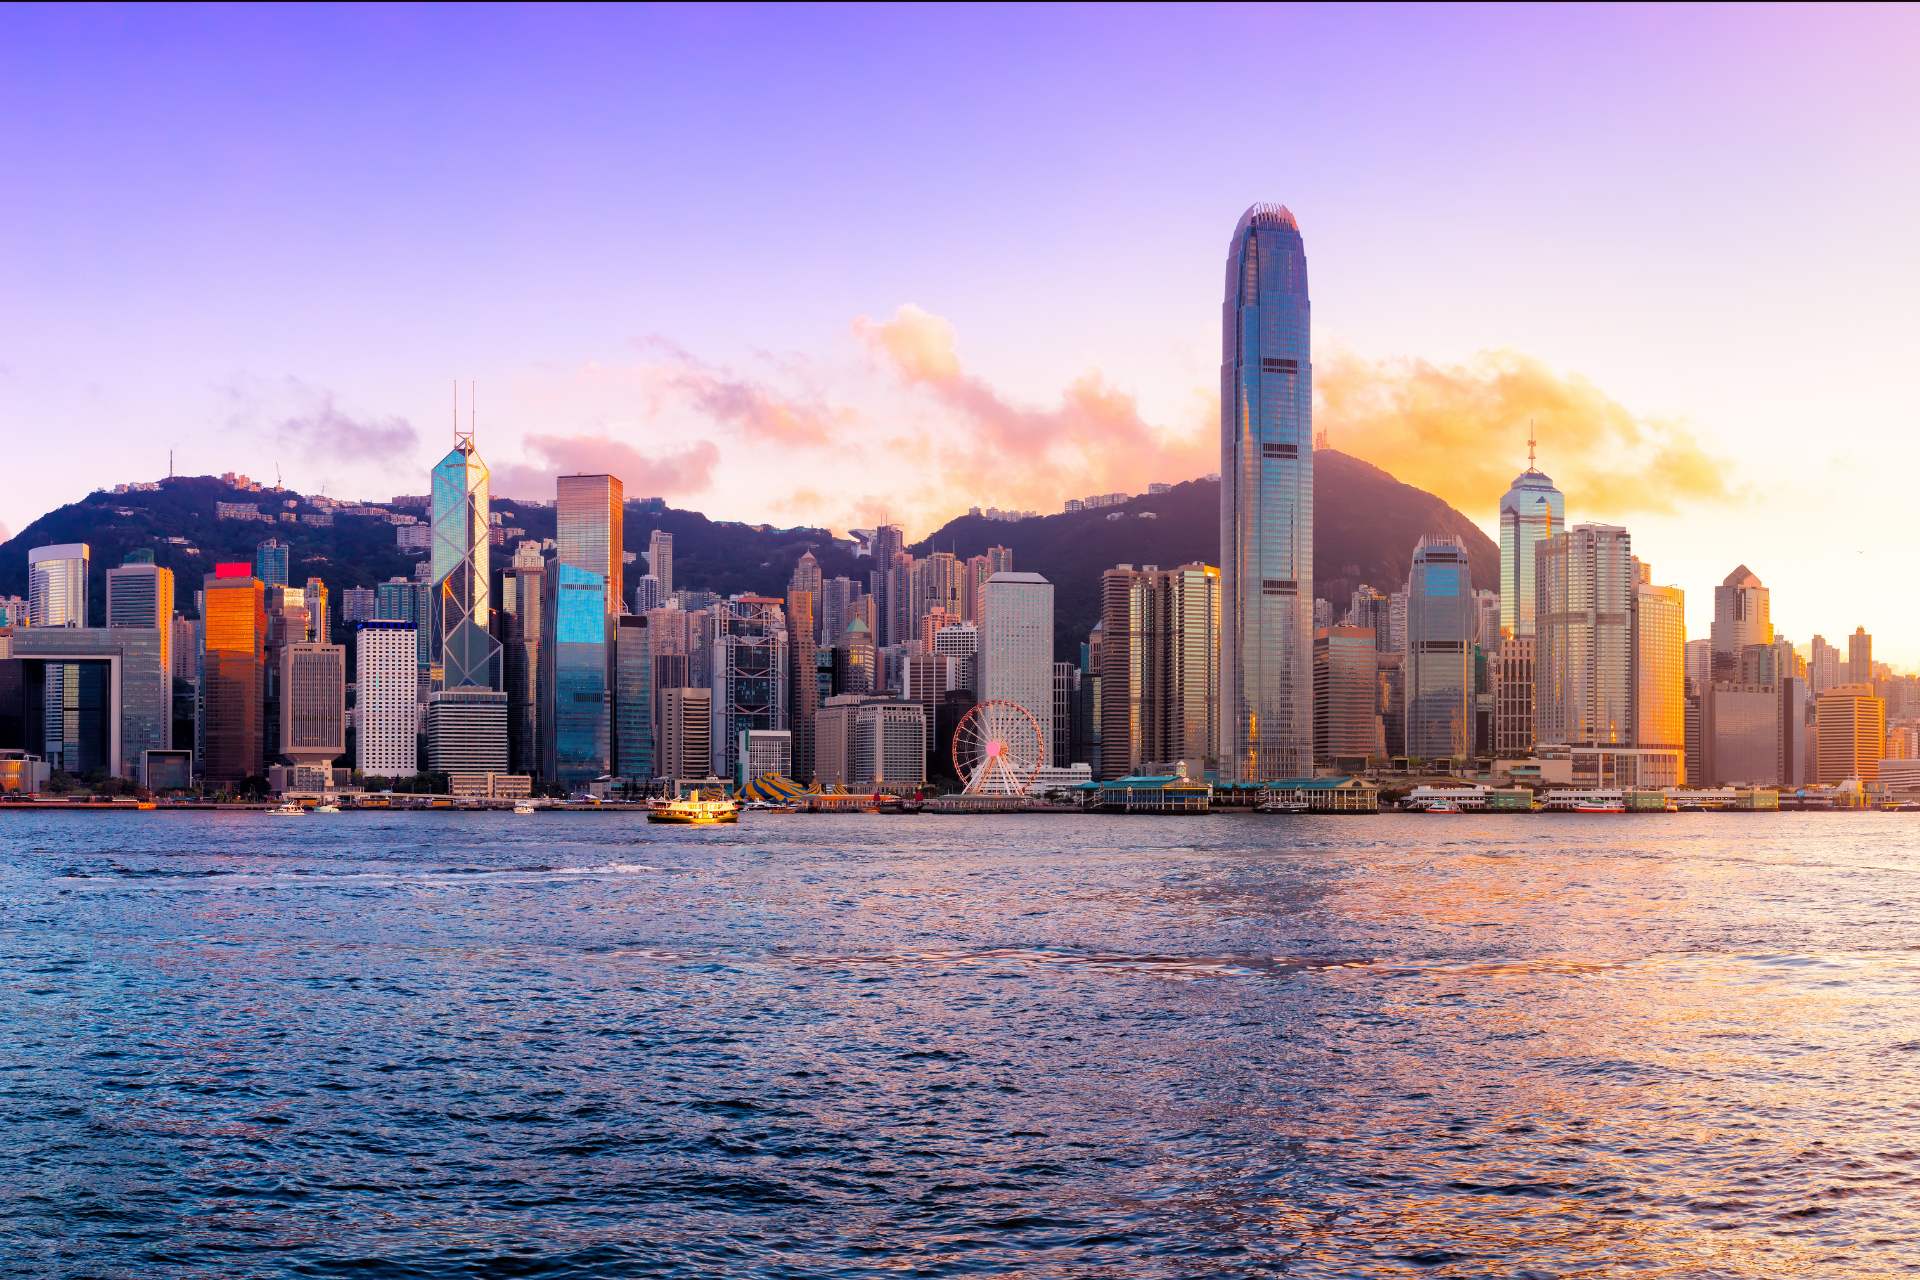 Hong Kong skyline ©Getty Images